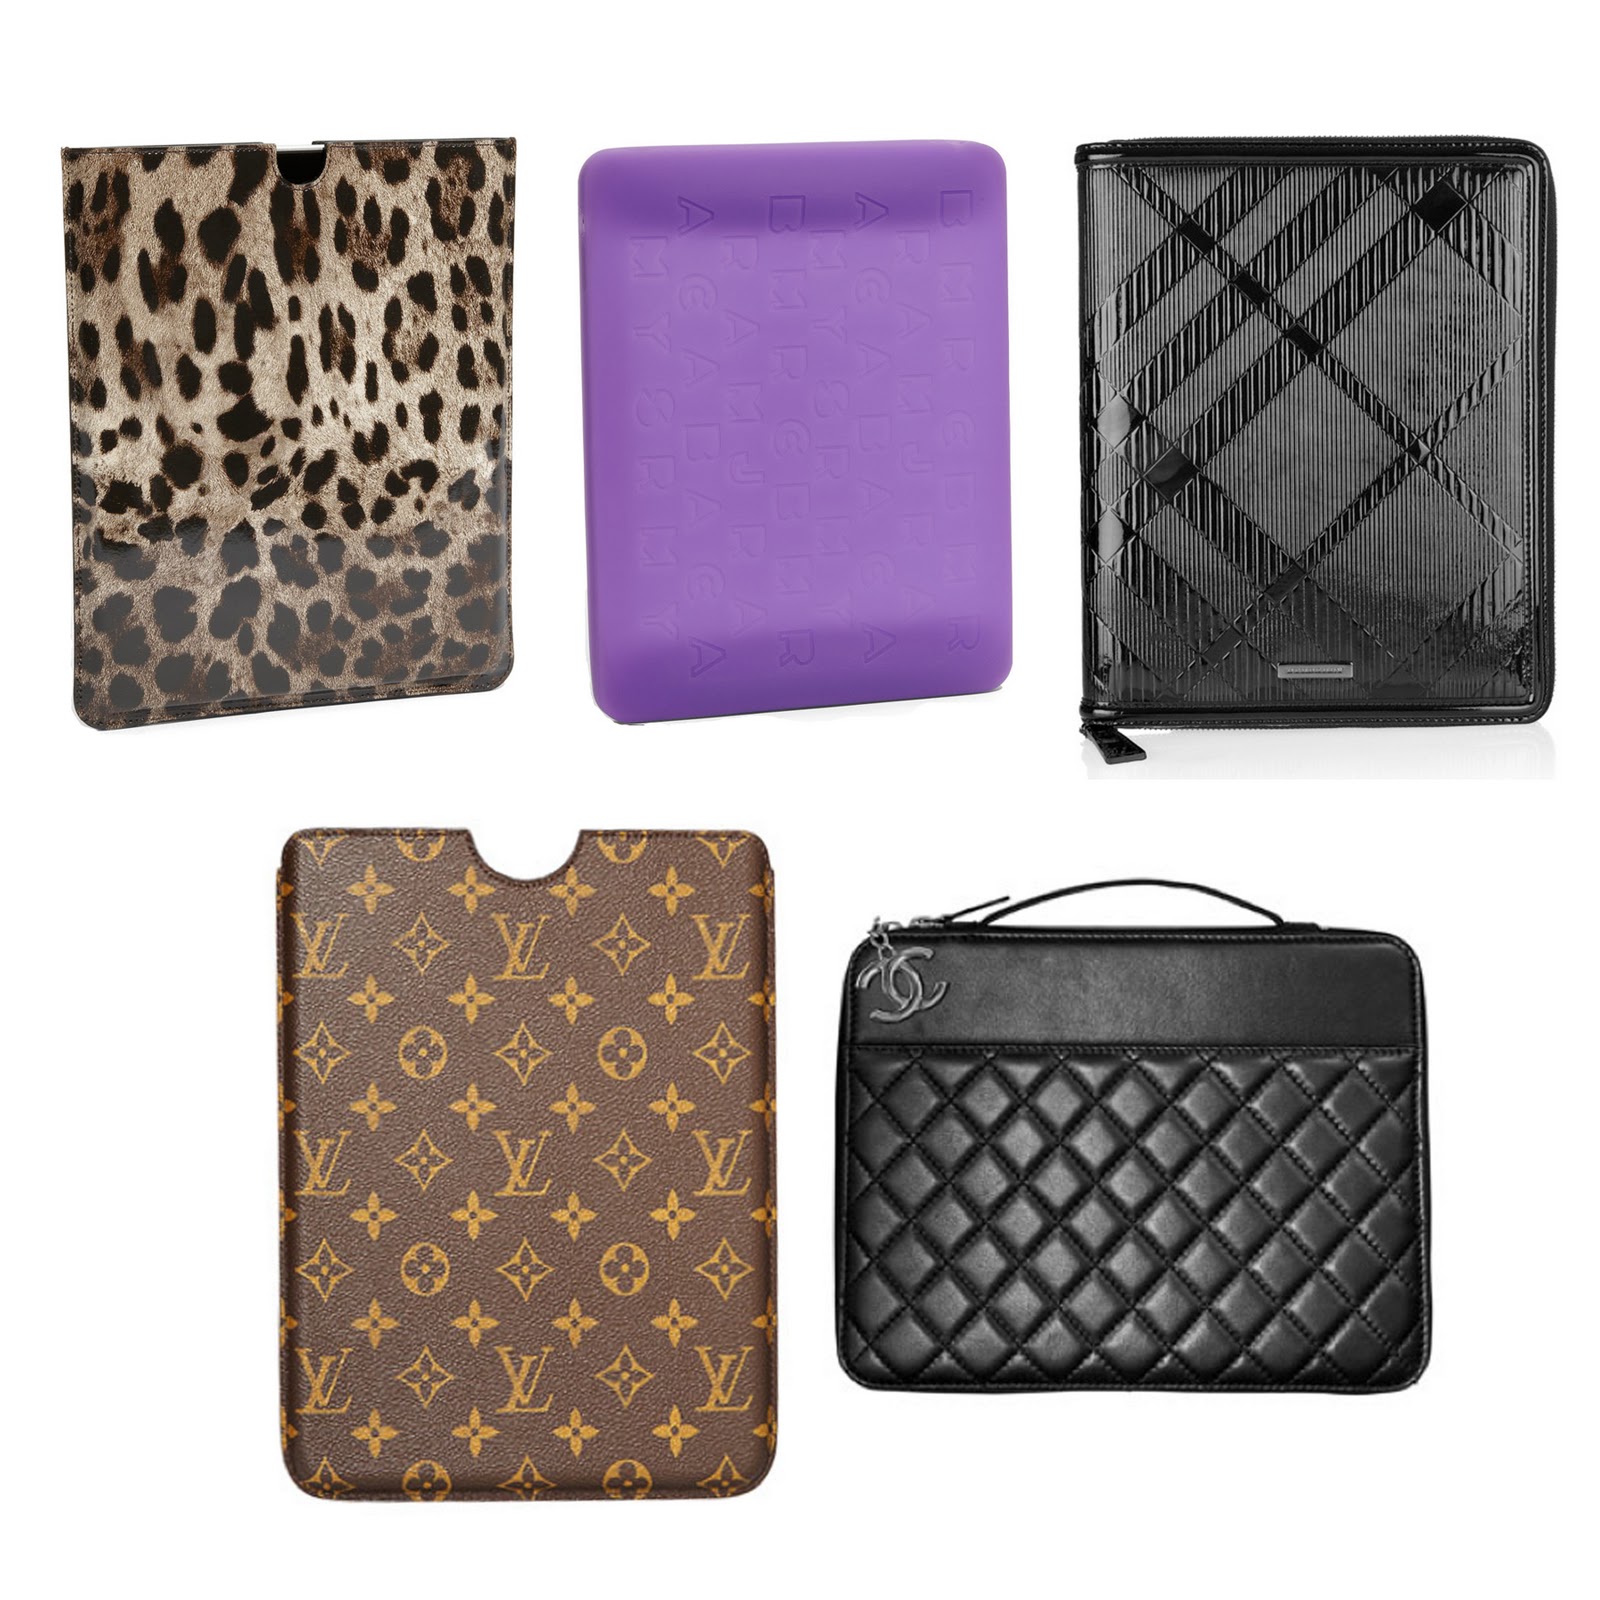 designer ipad cases and covers